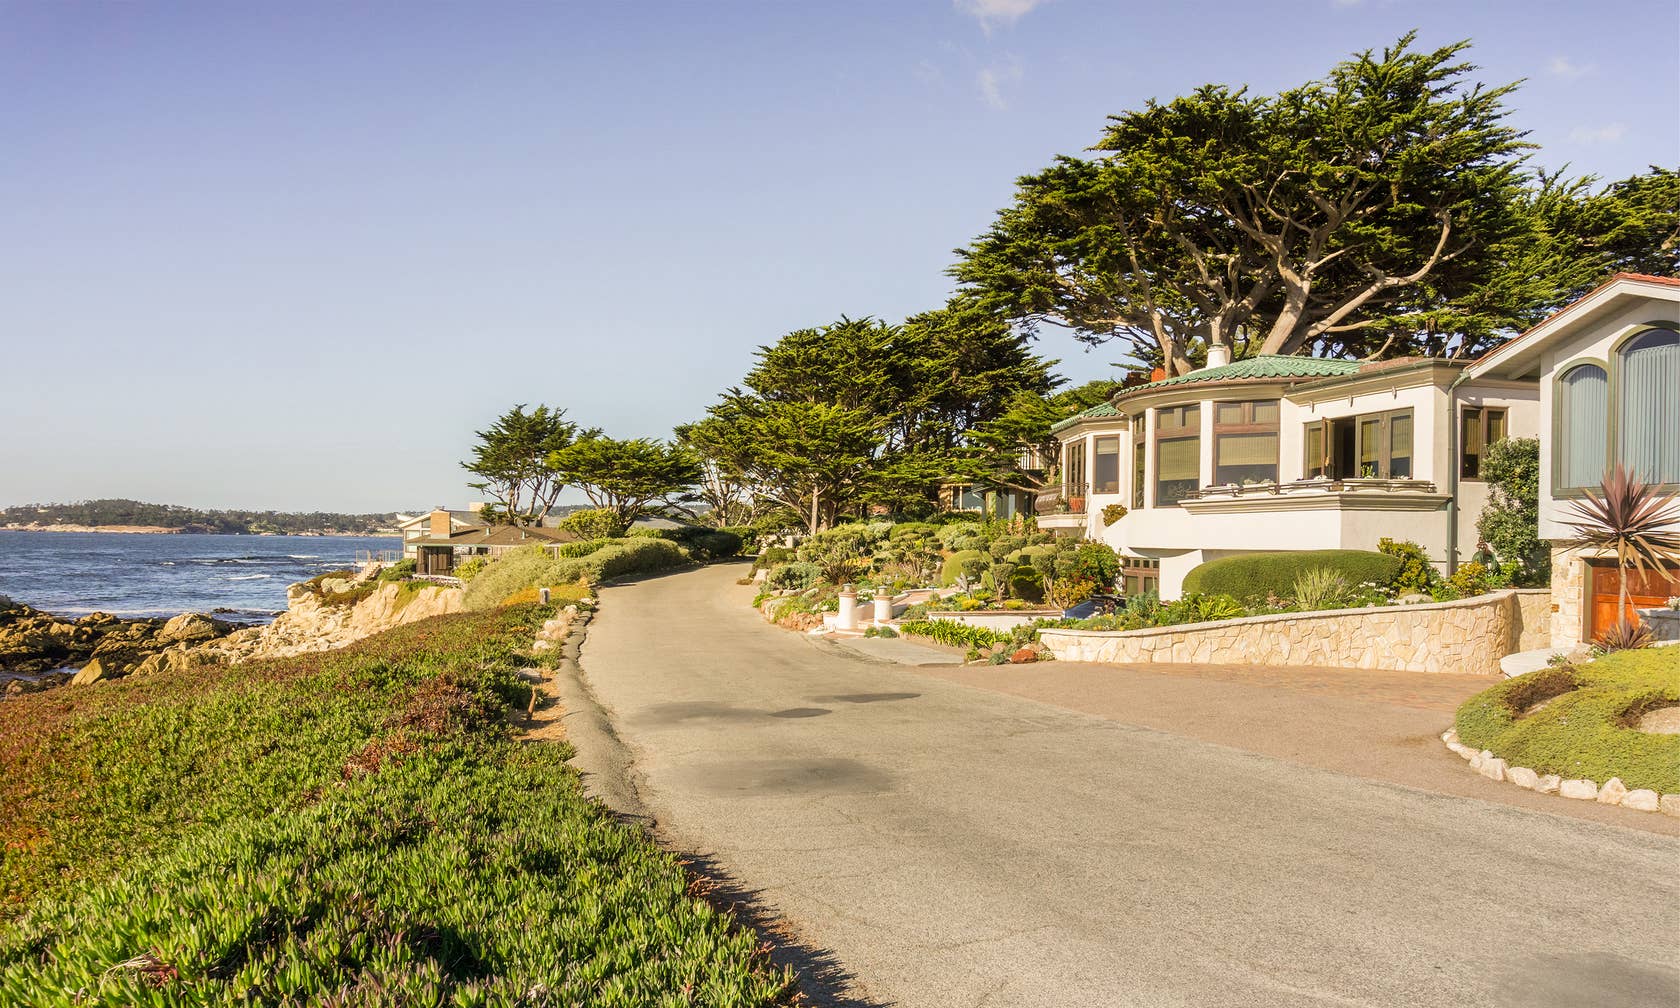 Carmel-by-the-Sea vacation rentals